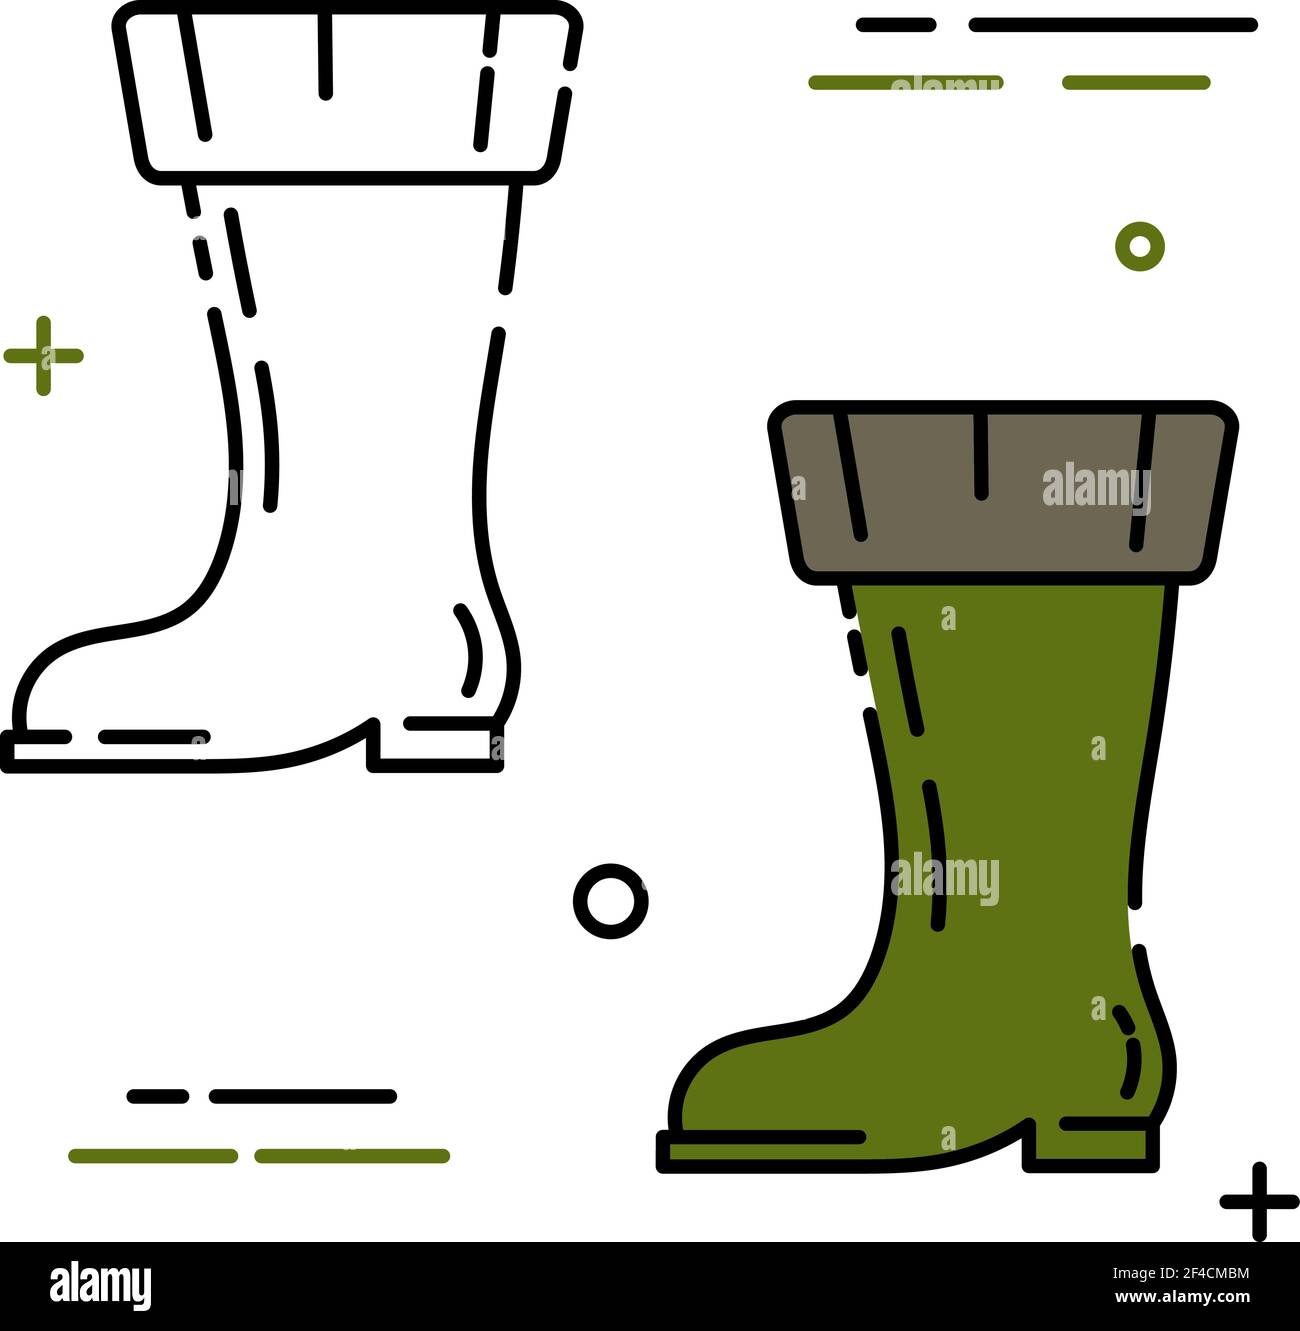 Pair of colored fishing boots in a linear style. Line icon. Isolated on white background. Vector illustration. Stock Vector